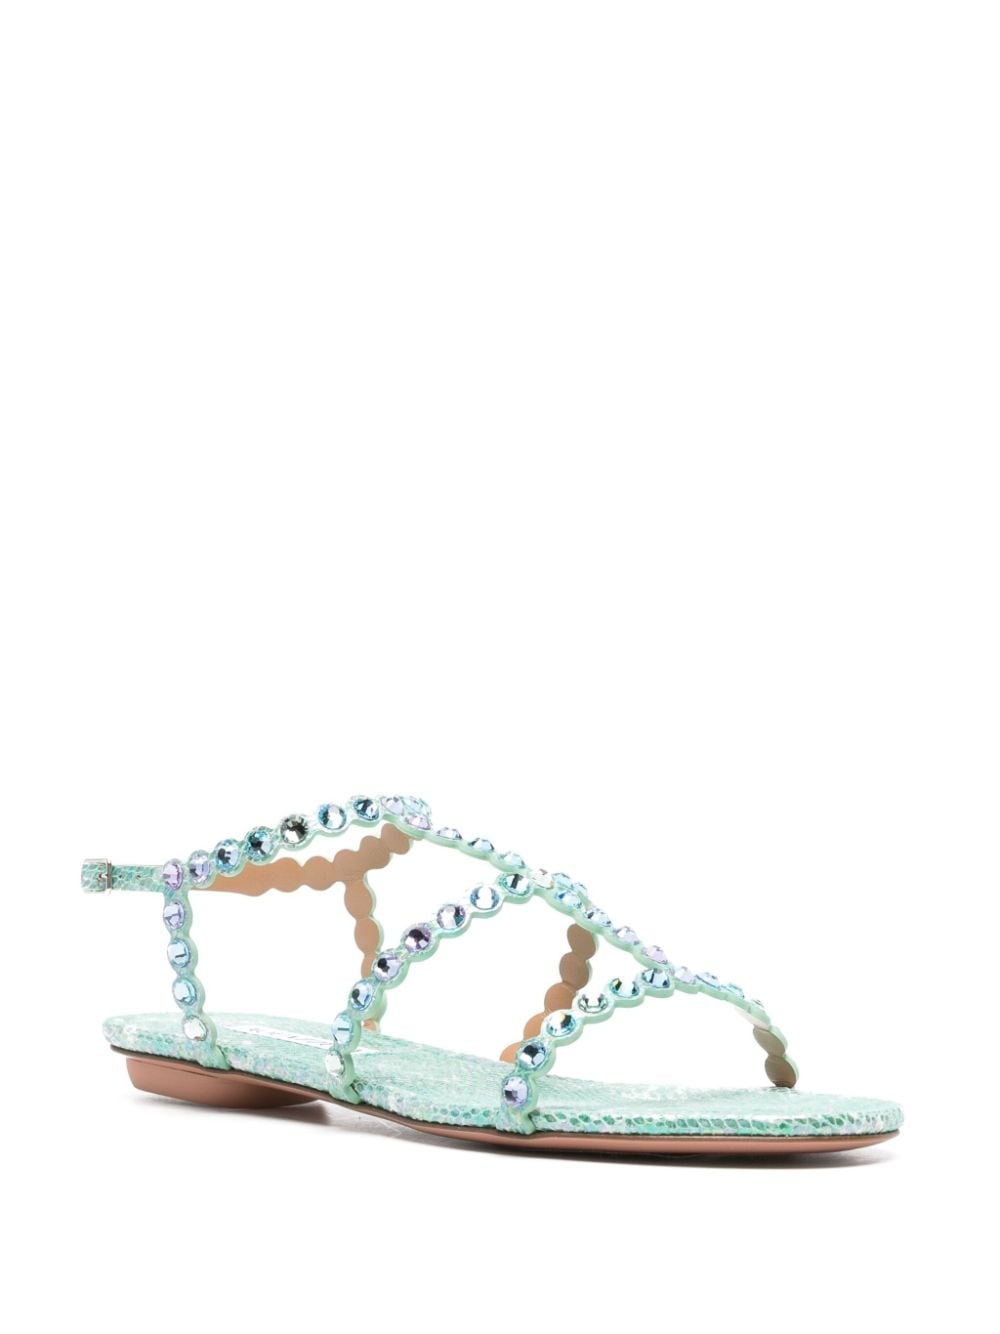 Tequila flat leather sandals - 2